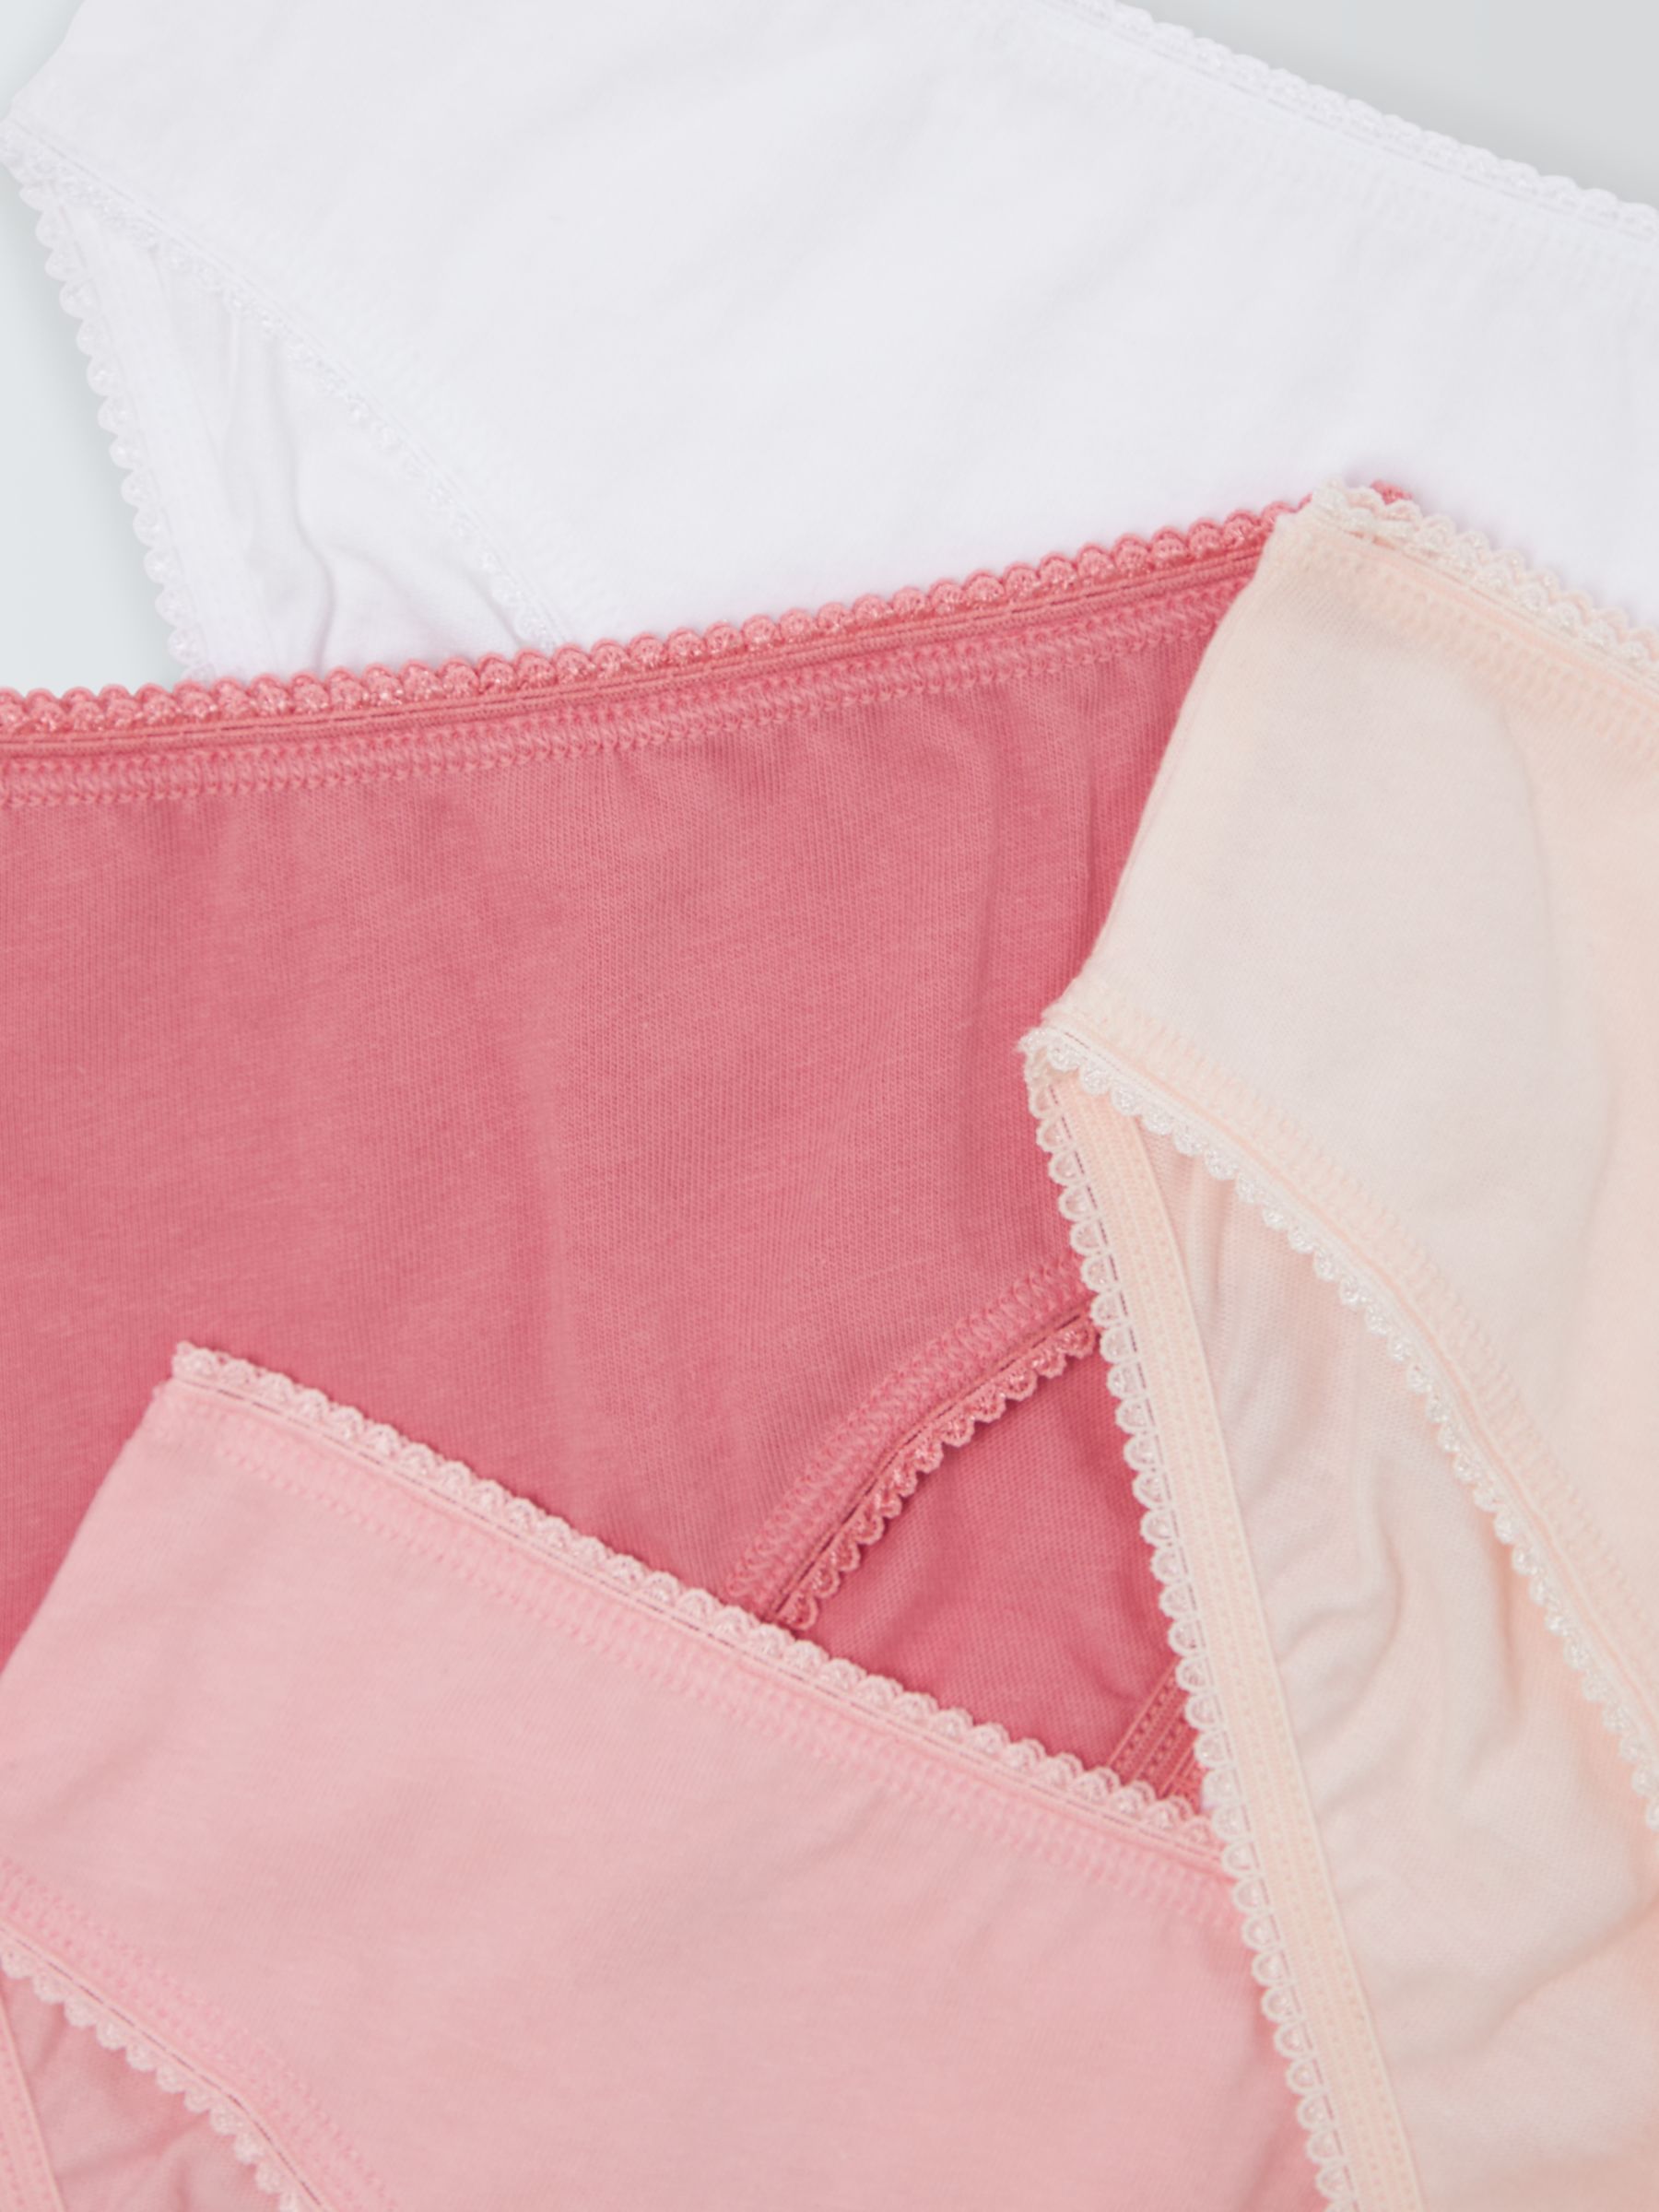 John Lewis Kids' Picot Trim Cotton Briefs, Pack of 7, Pinks, 2 years